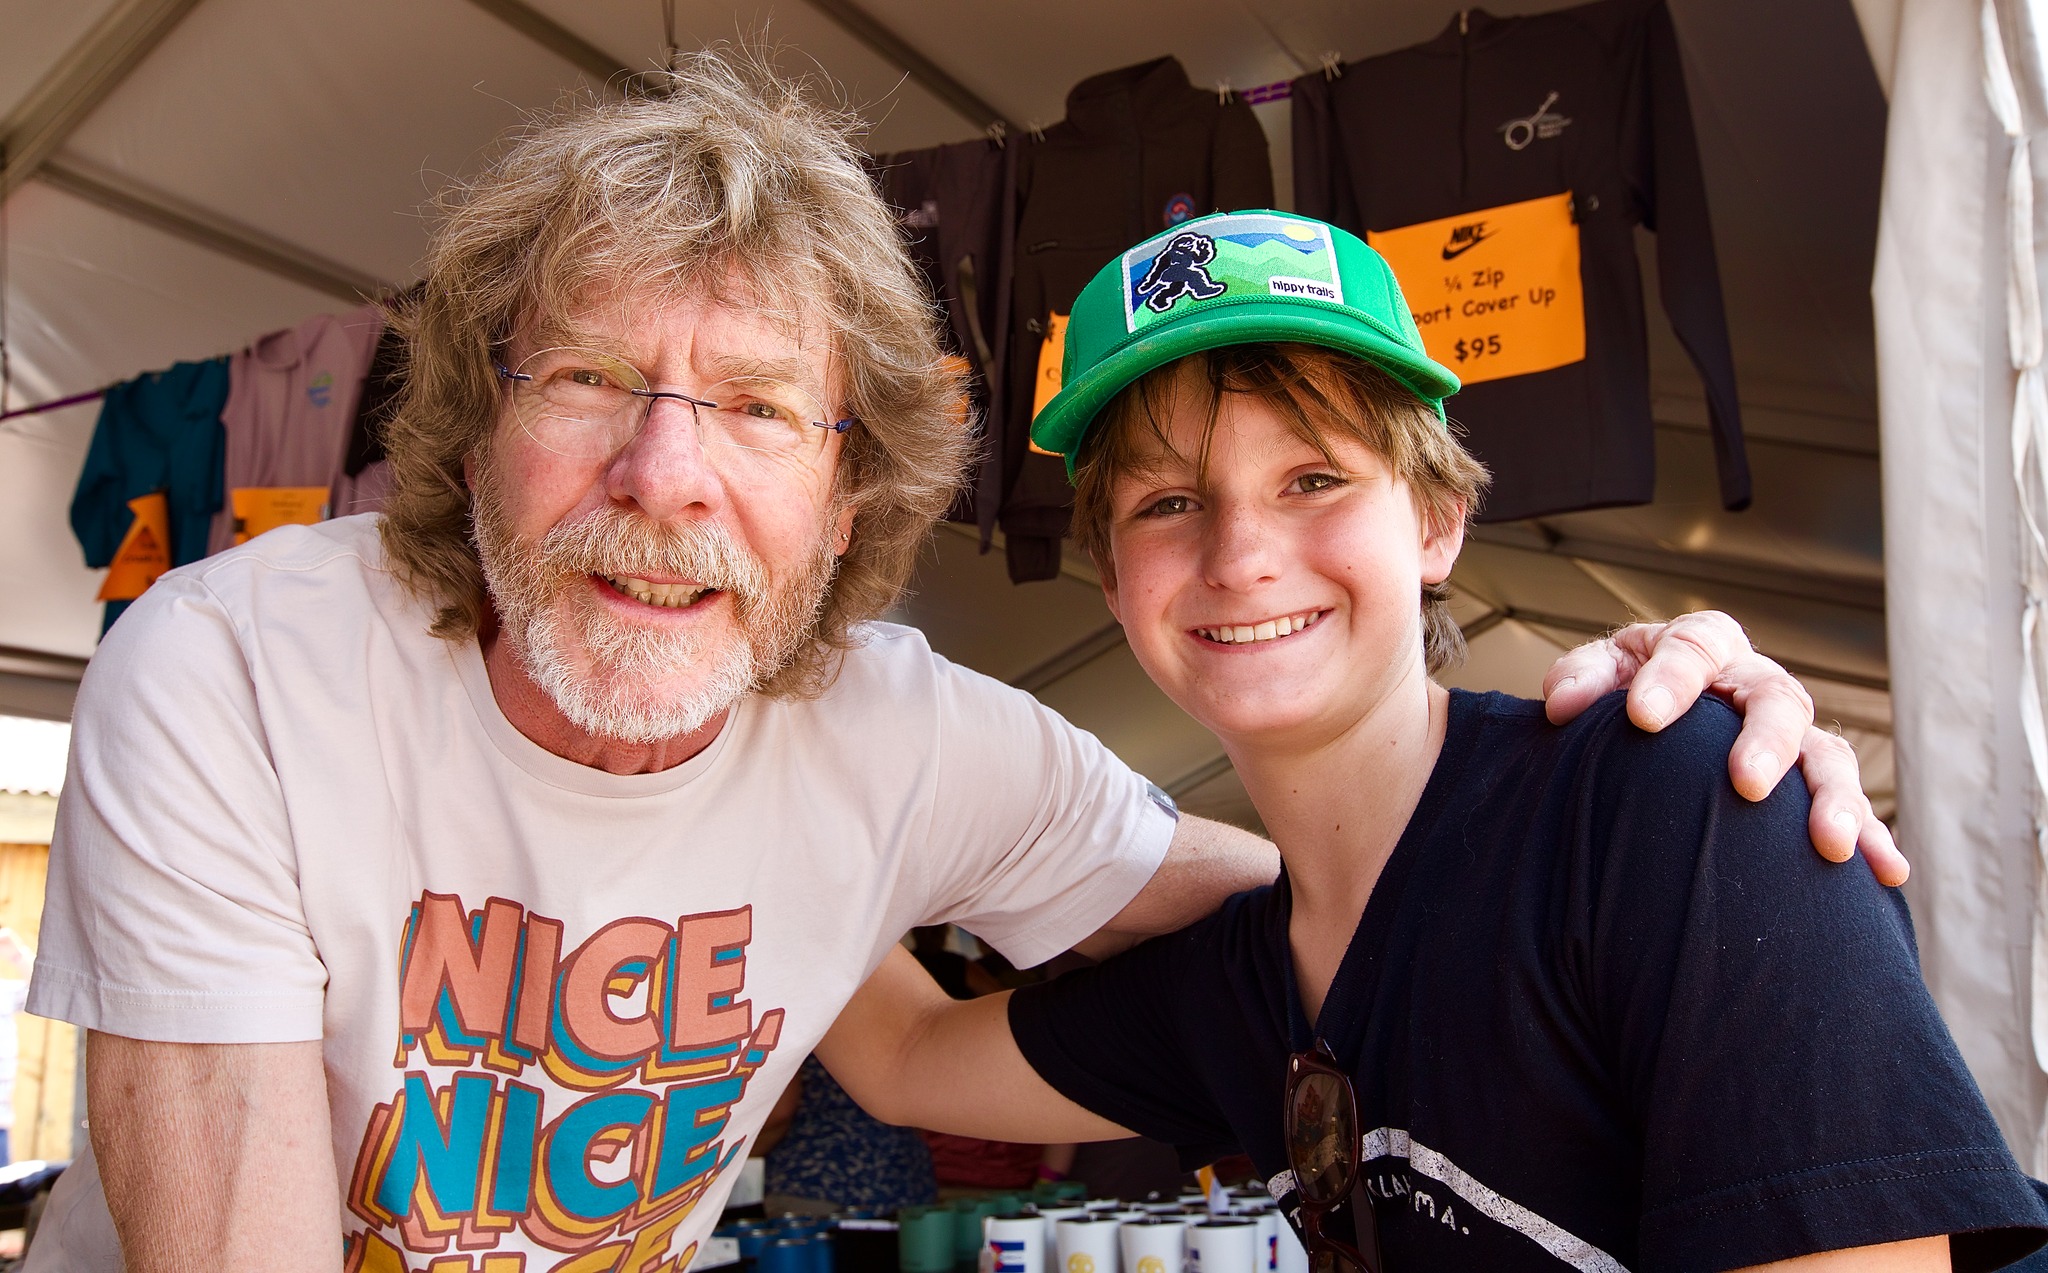 Sam Bush taking time out to chat with fans of all ages and sign autographs